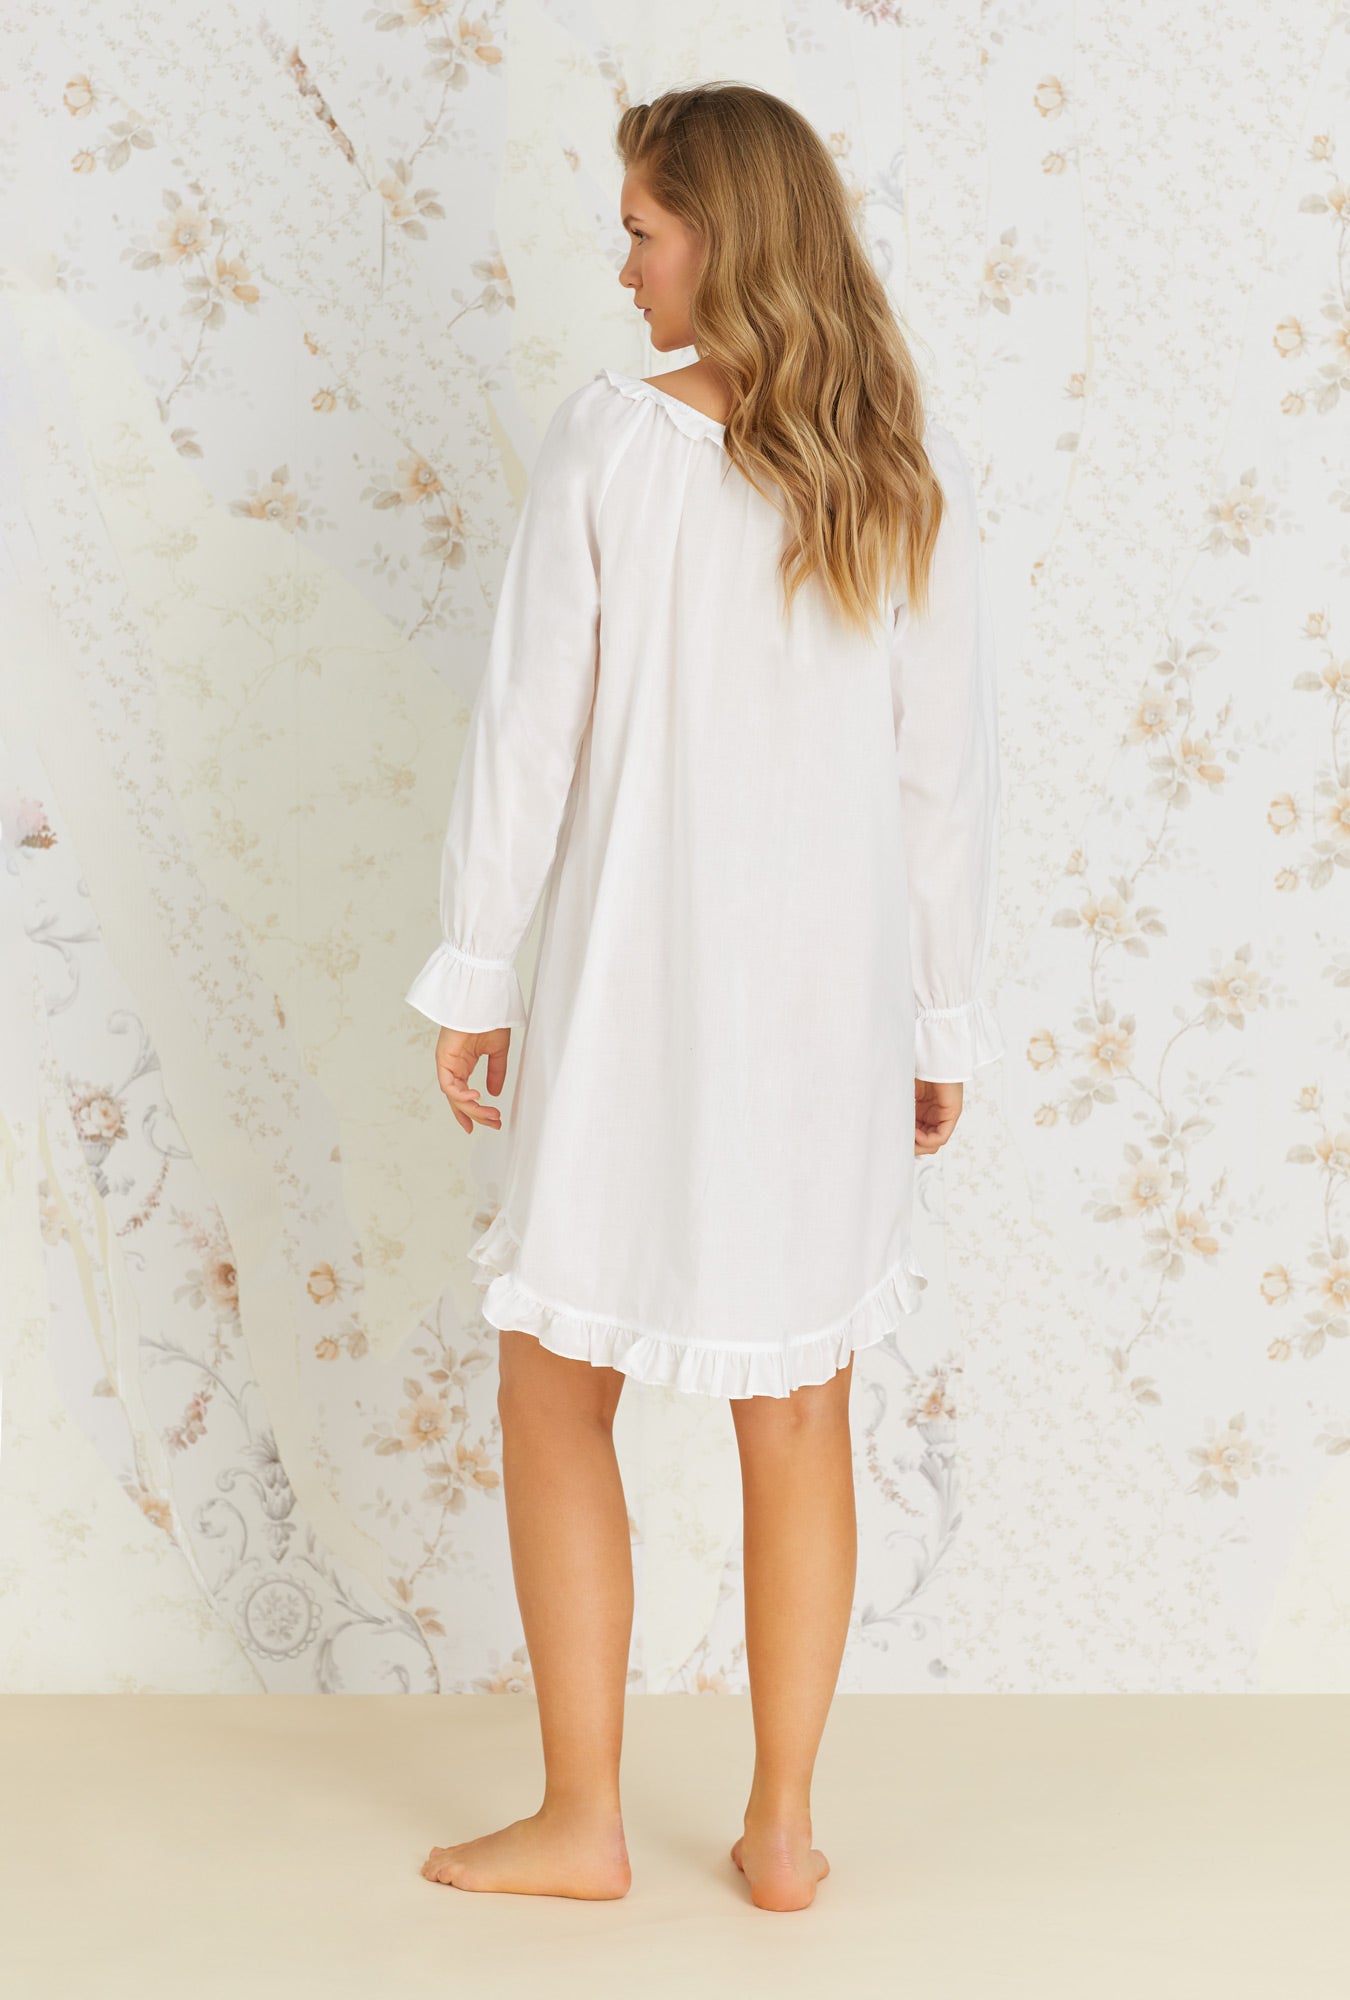 A lady wearing white cotton poet nightshirt with divine pattern.